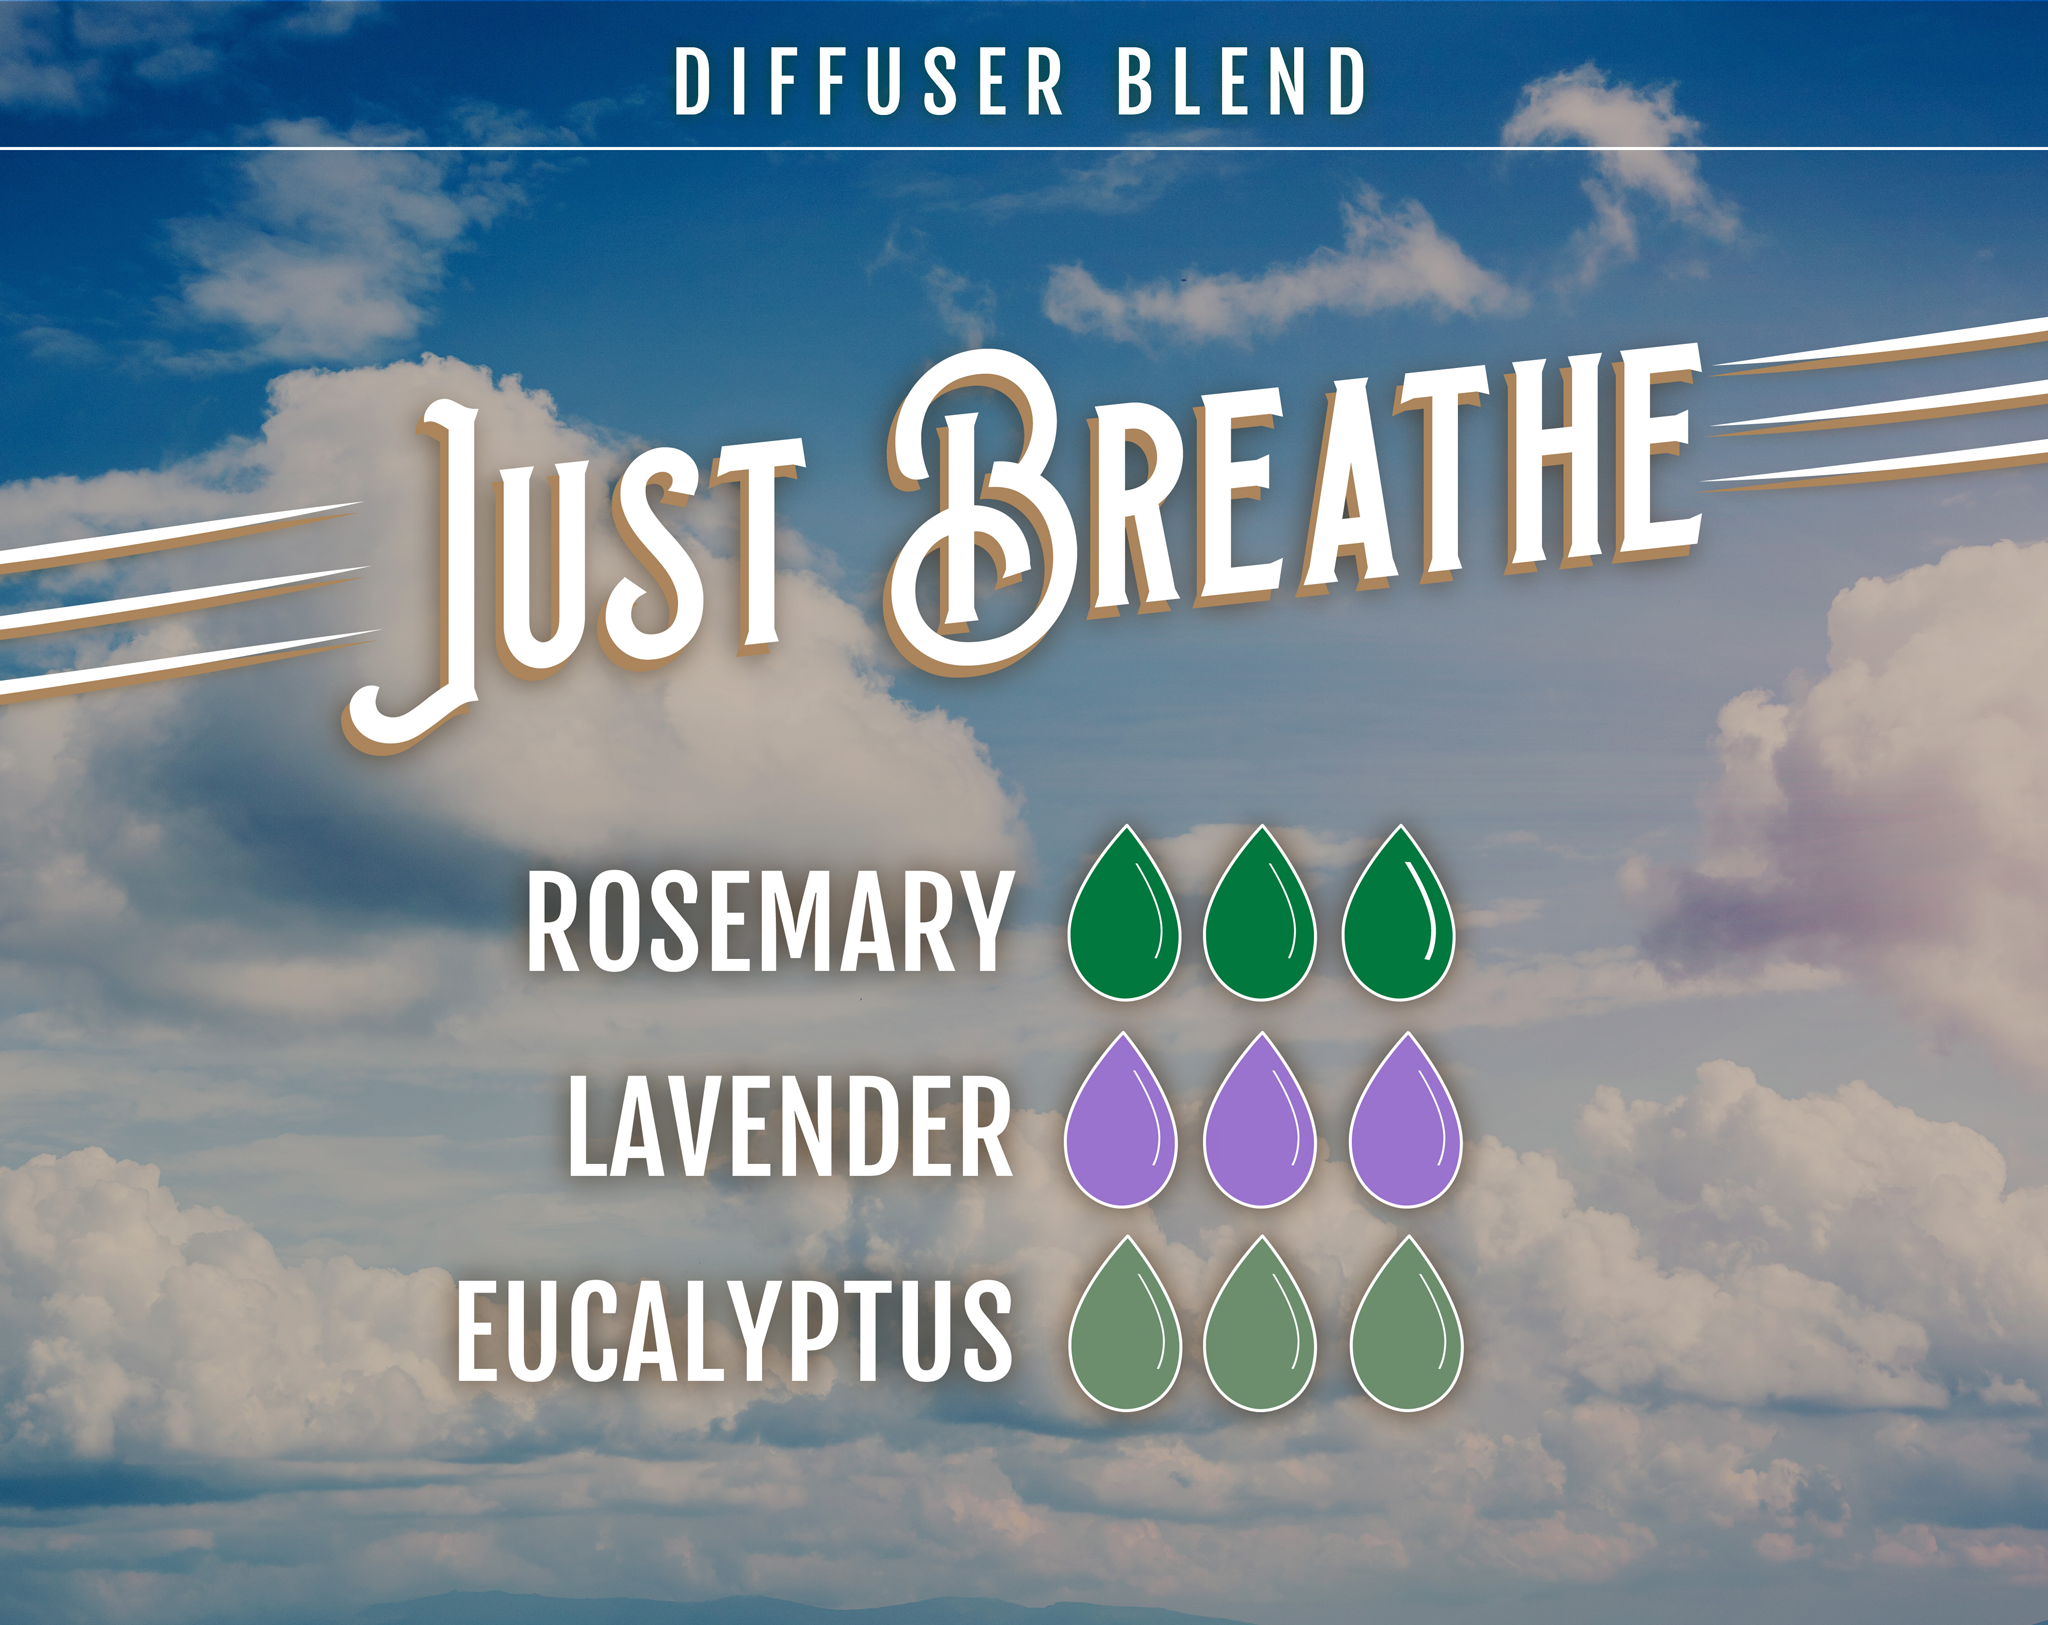 Just Breath Rosemary Diffuser Blend - 3 Drops of Rosemary, 3 Drops of Lavender, 3 drops of Eucalyptus